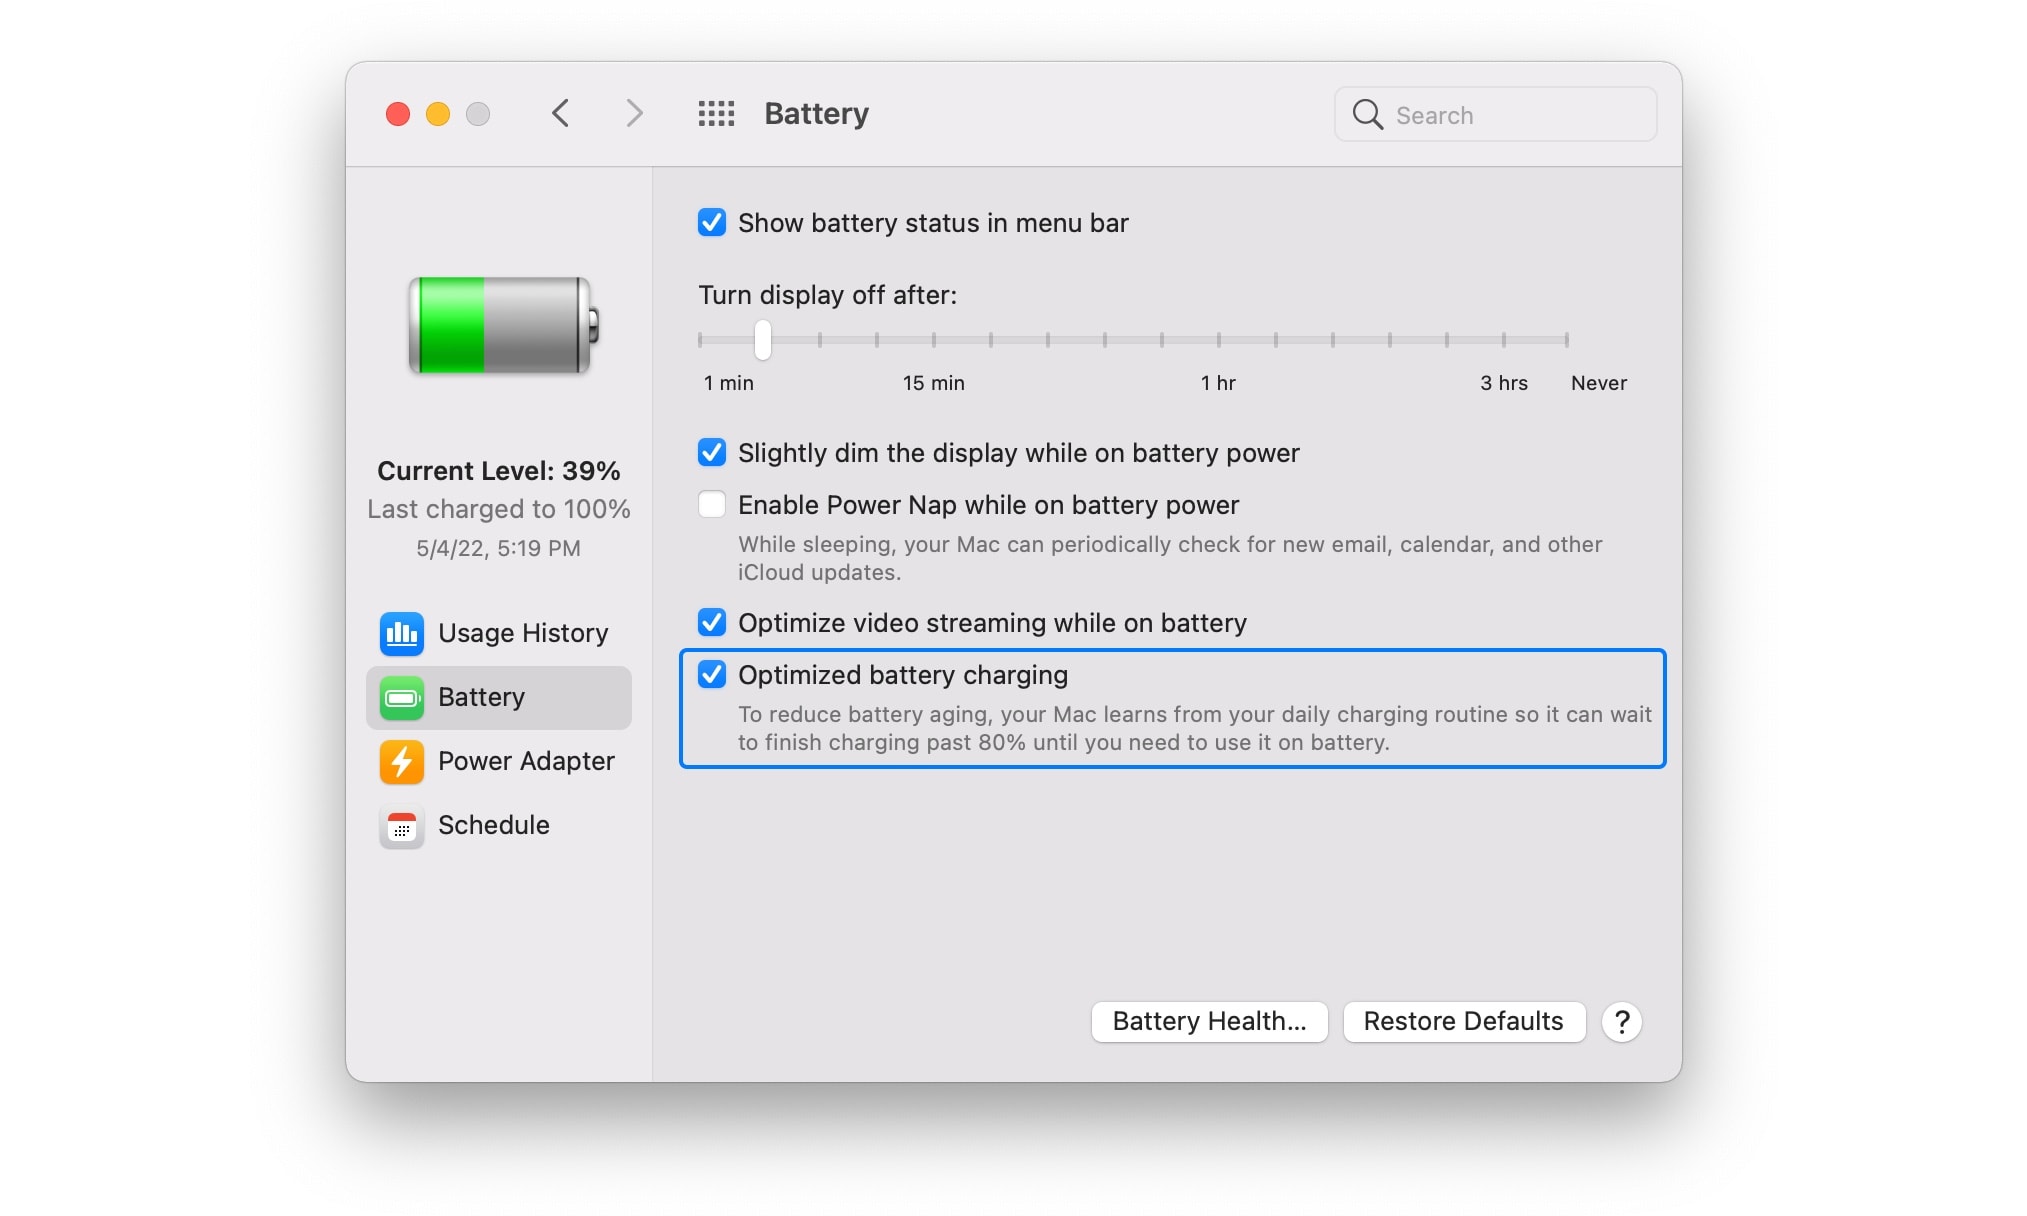 Want battery MacBook battery life? Enable optimized battery charging in System Preferences in macOS Big Sur or later.